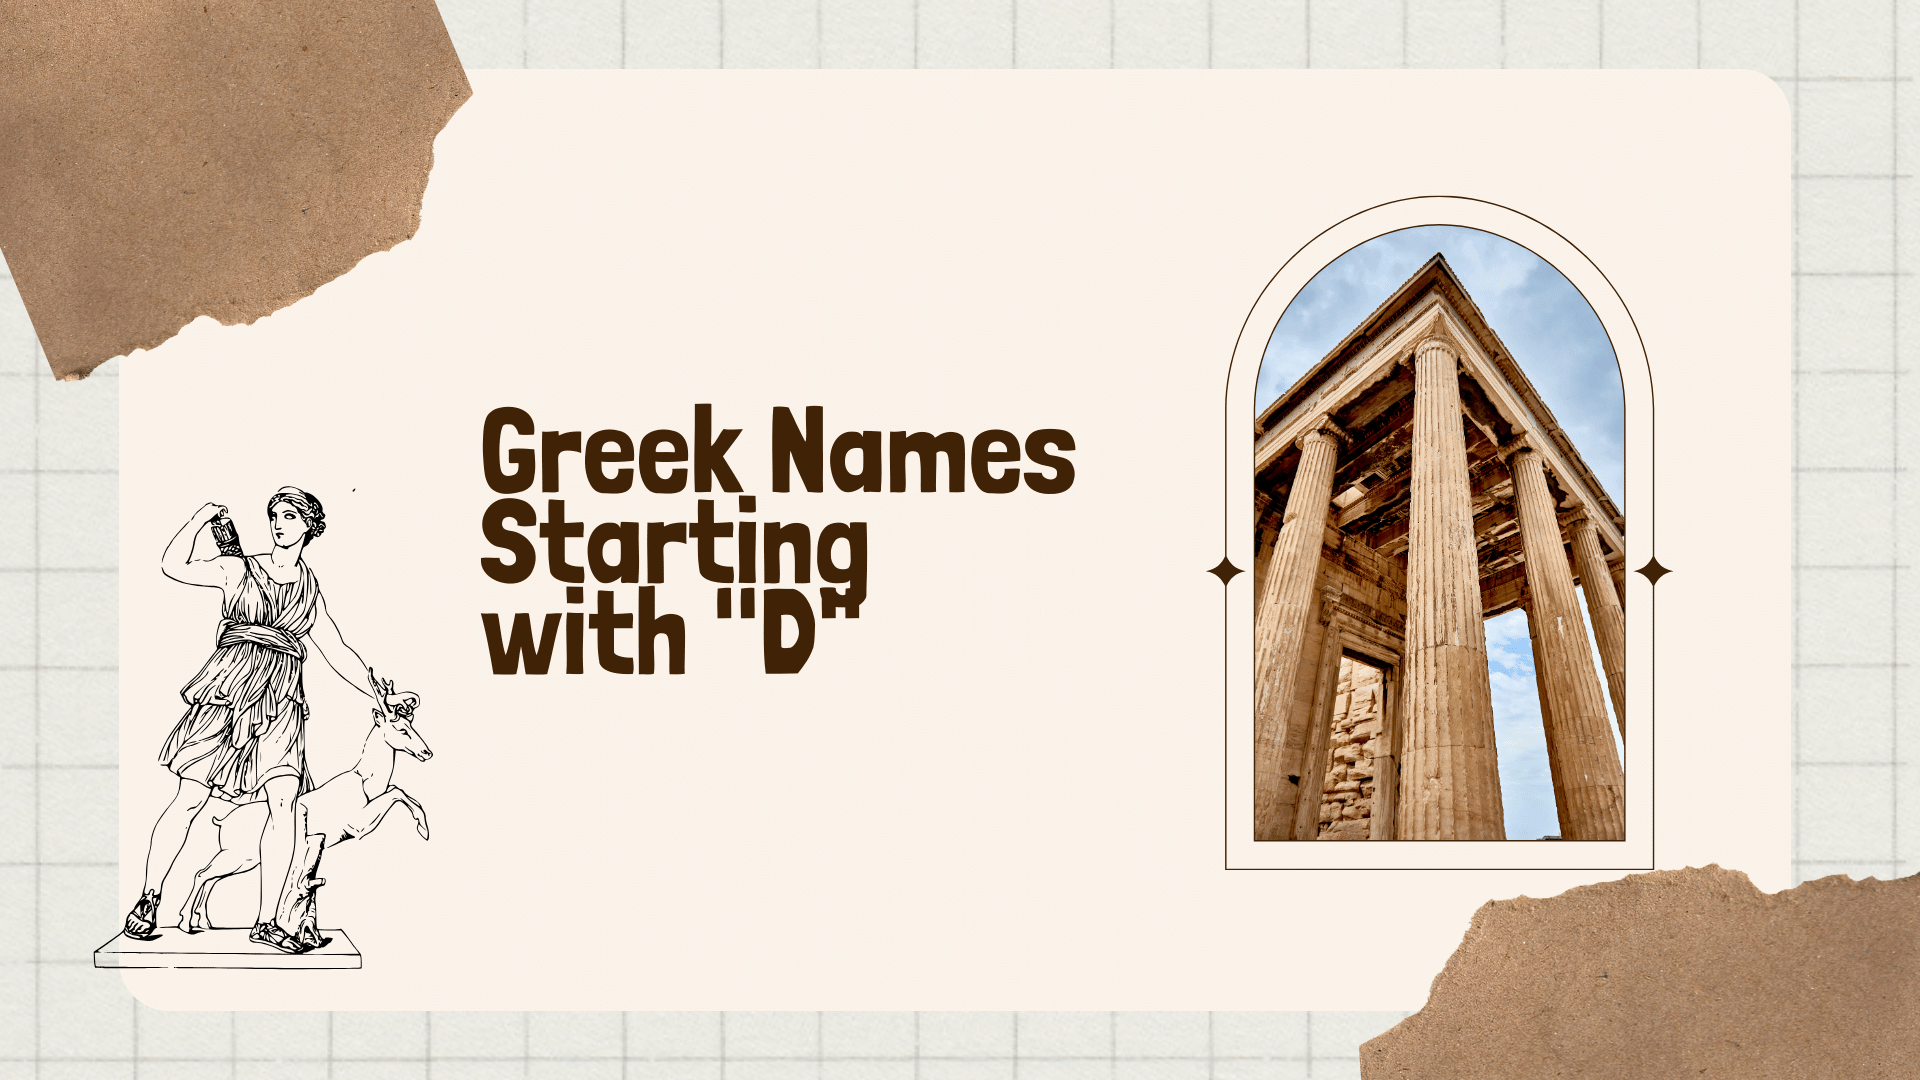 Greek Names Starting With "D"